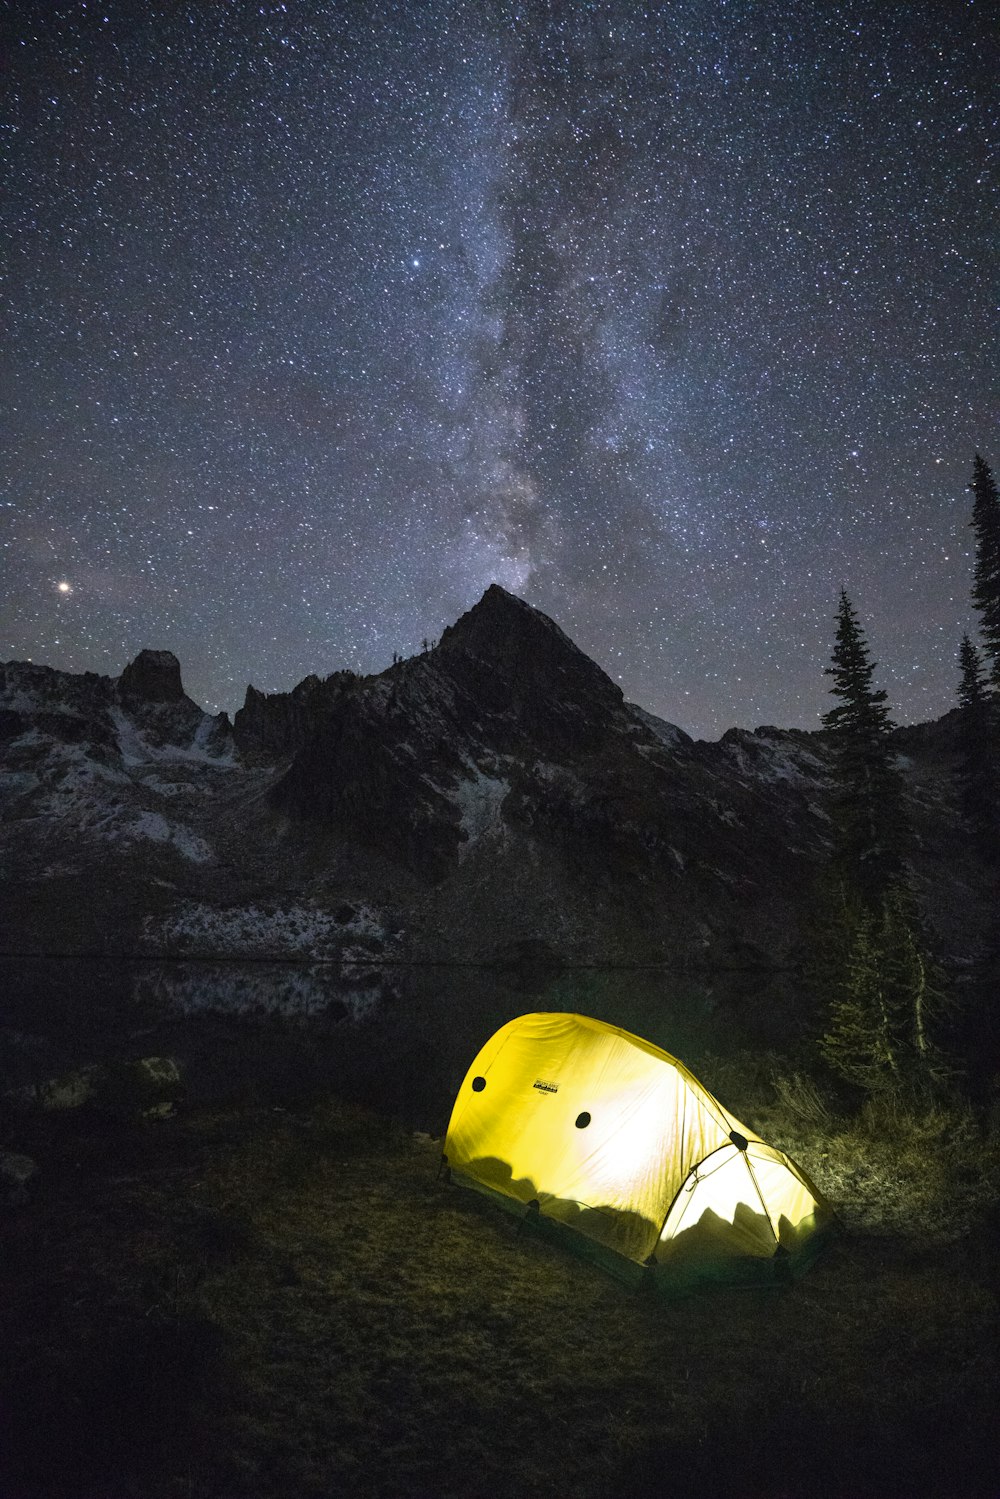 lighted lamp in yellow dome tent under milky way